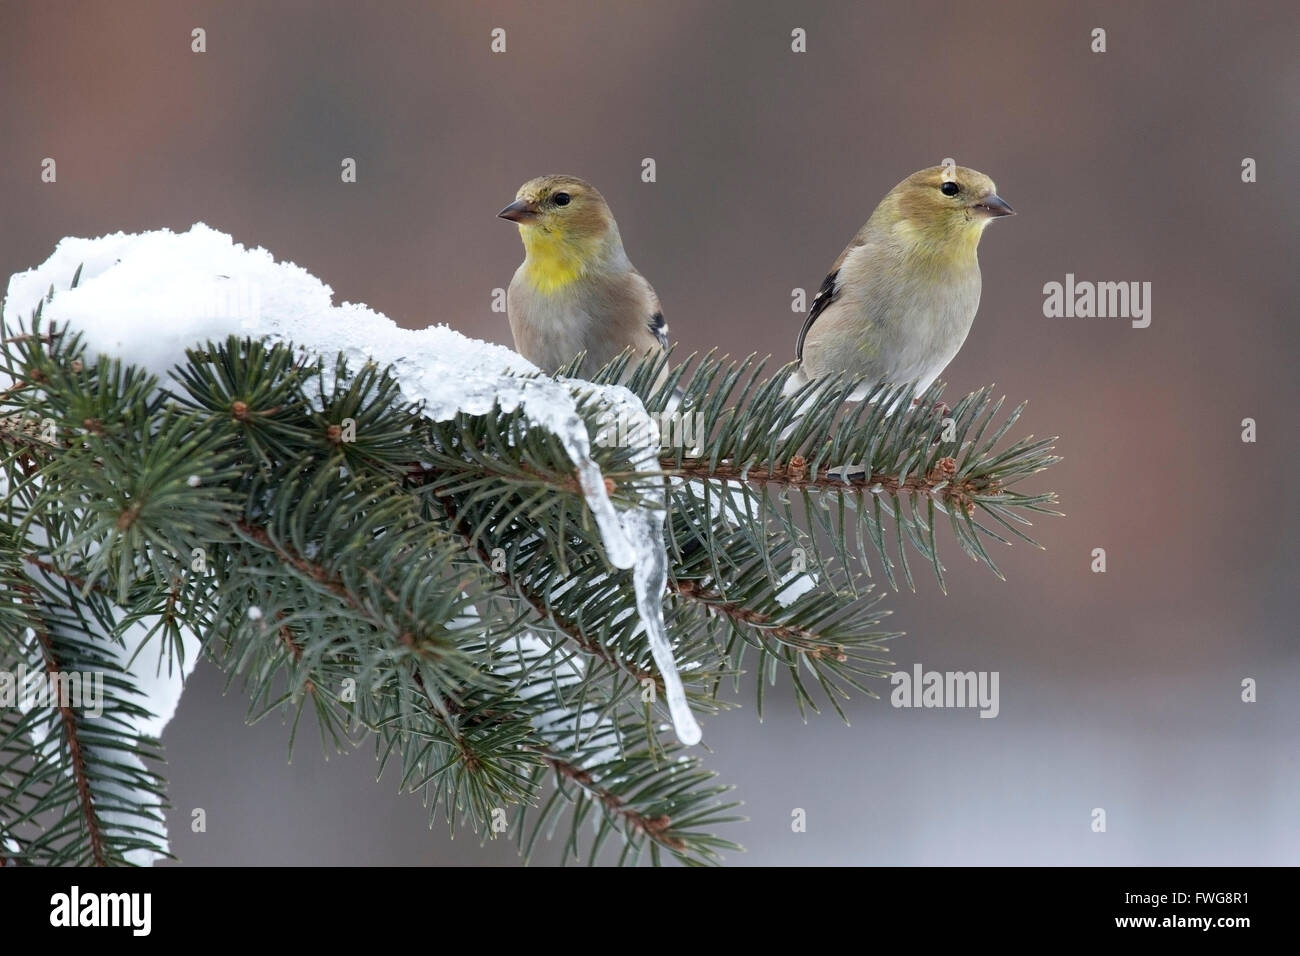 Pair of goldfinches perching on snowy pine branch Stock Photo